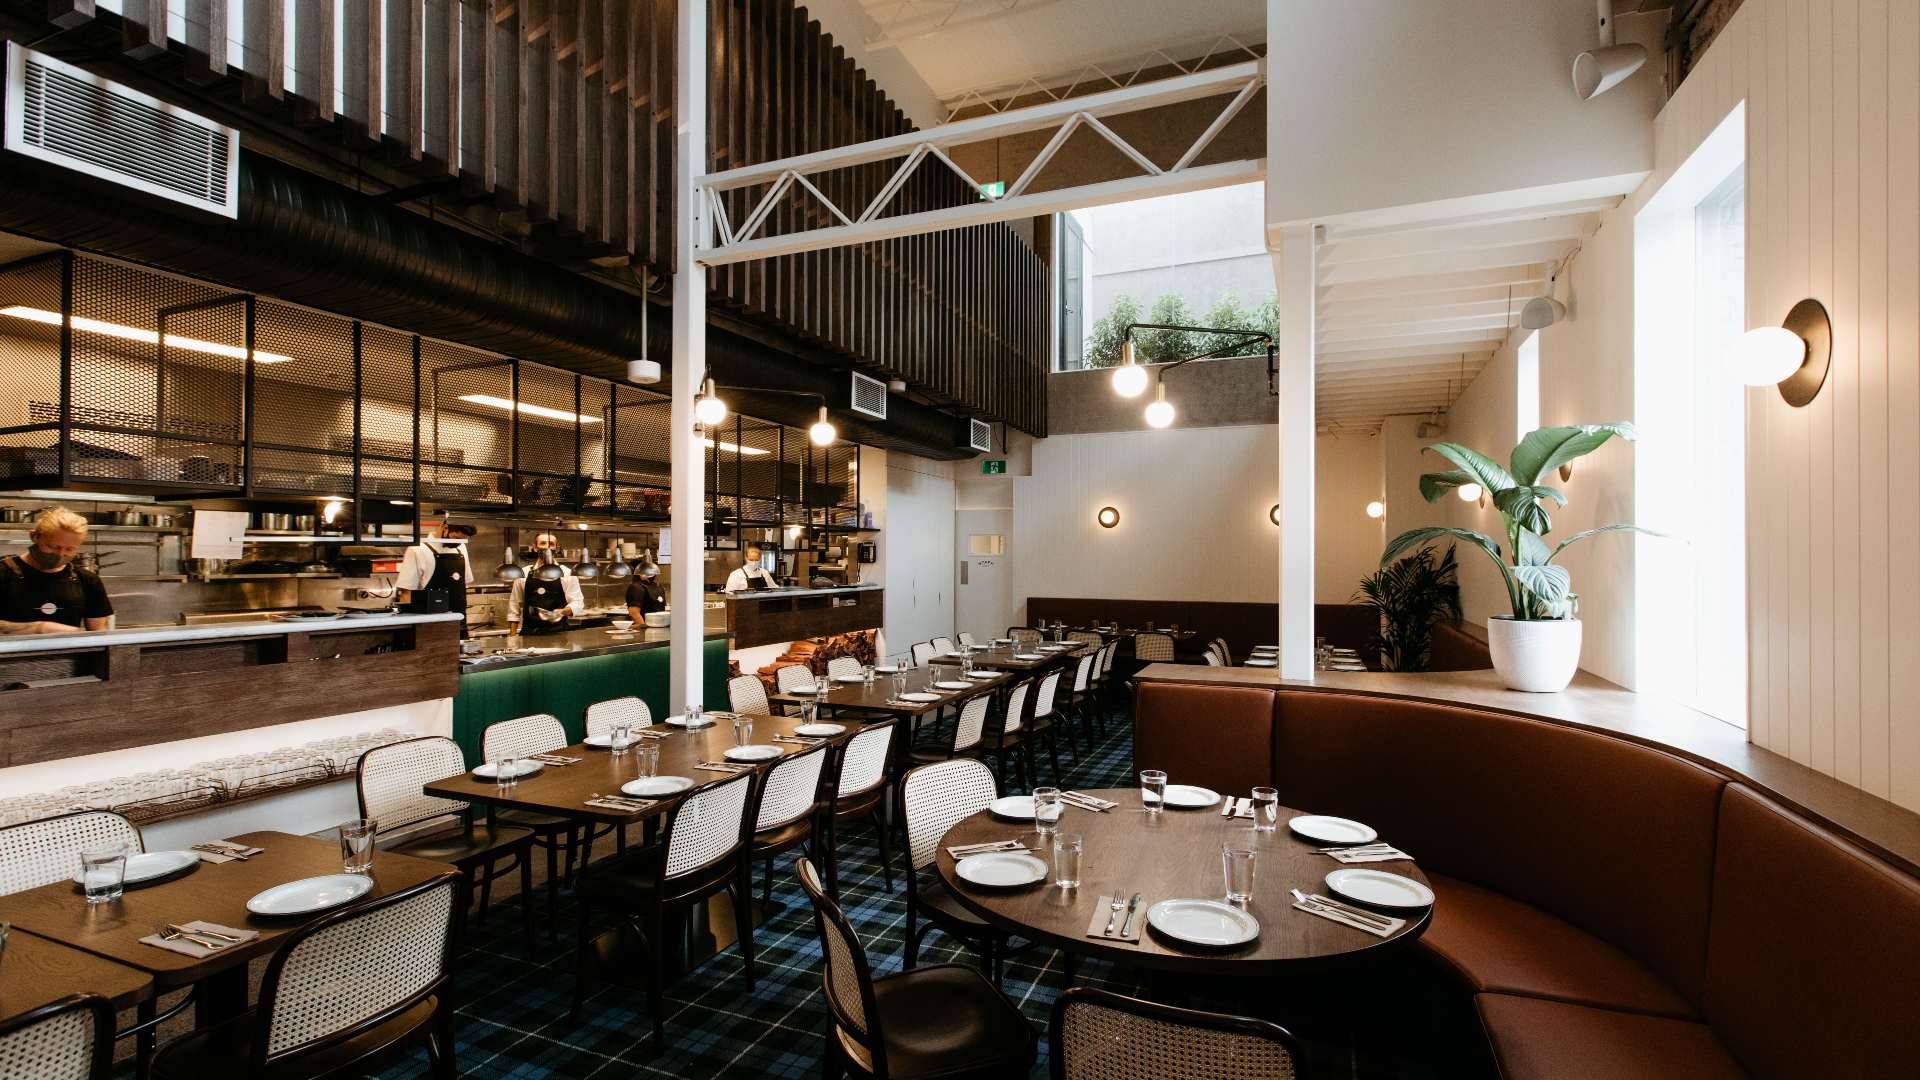 Hobsons Bay Hotel Is Williamstown's New Three-Storey Neighbourhood Pub with a Rooftop Bar